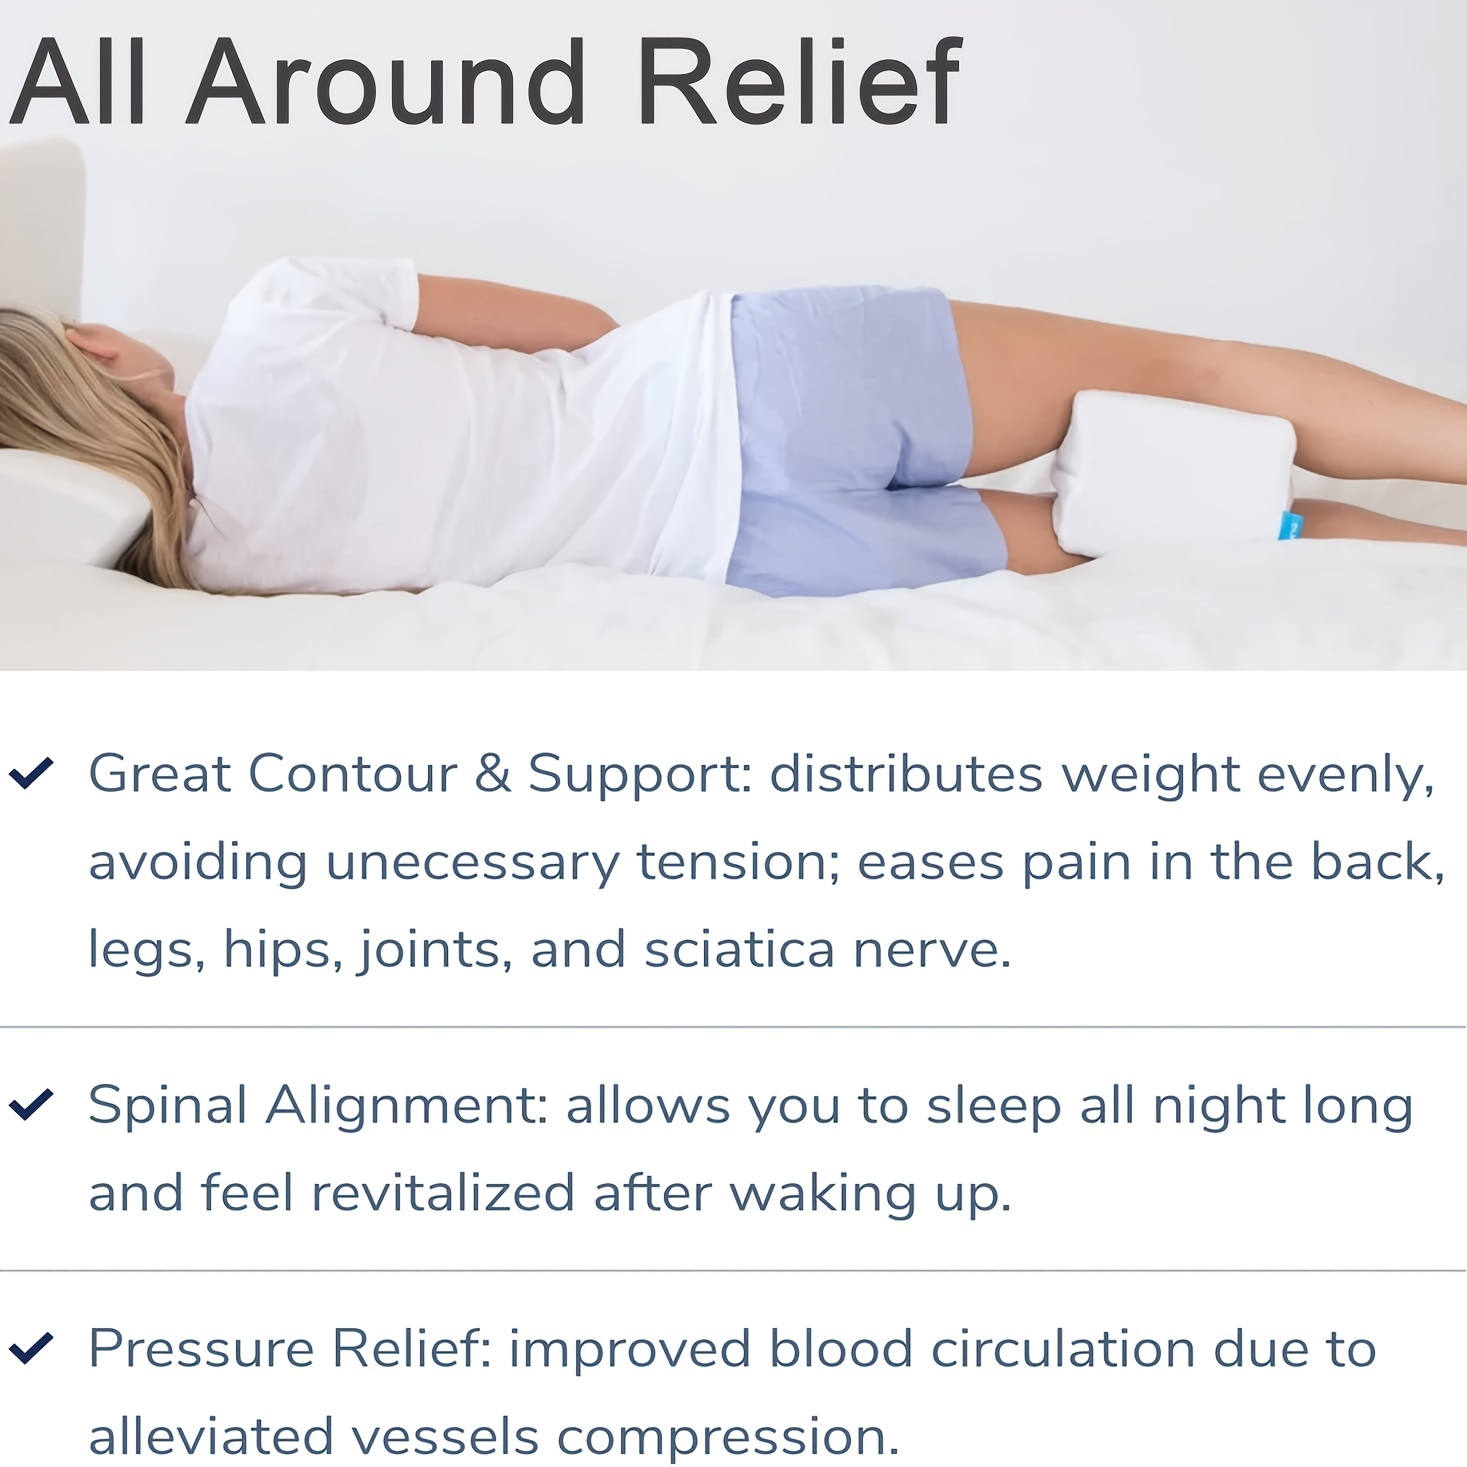 Leg Pillow For Sleeping, Side Sleeper Cushion Support Knee Pillows For Back  Pain Relief, Pregnant And Side Sleepers